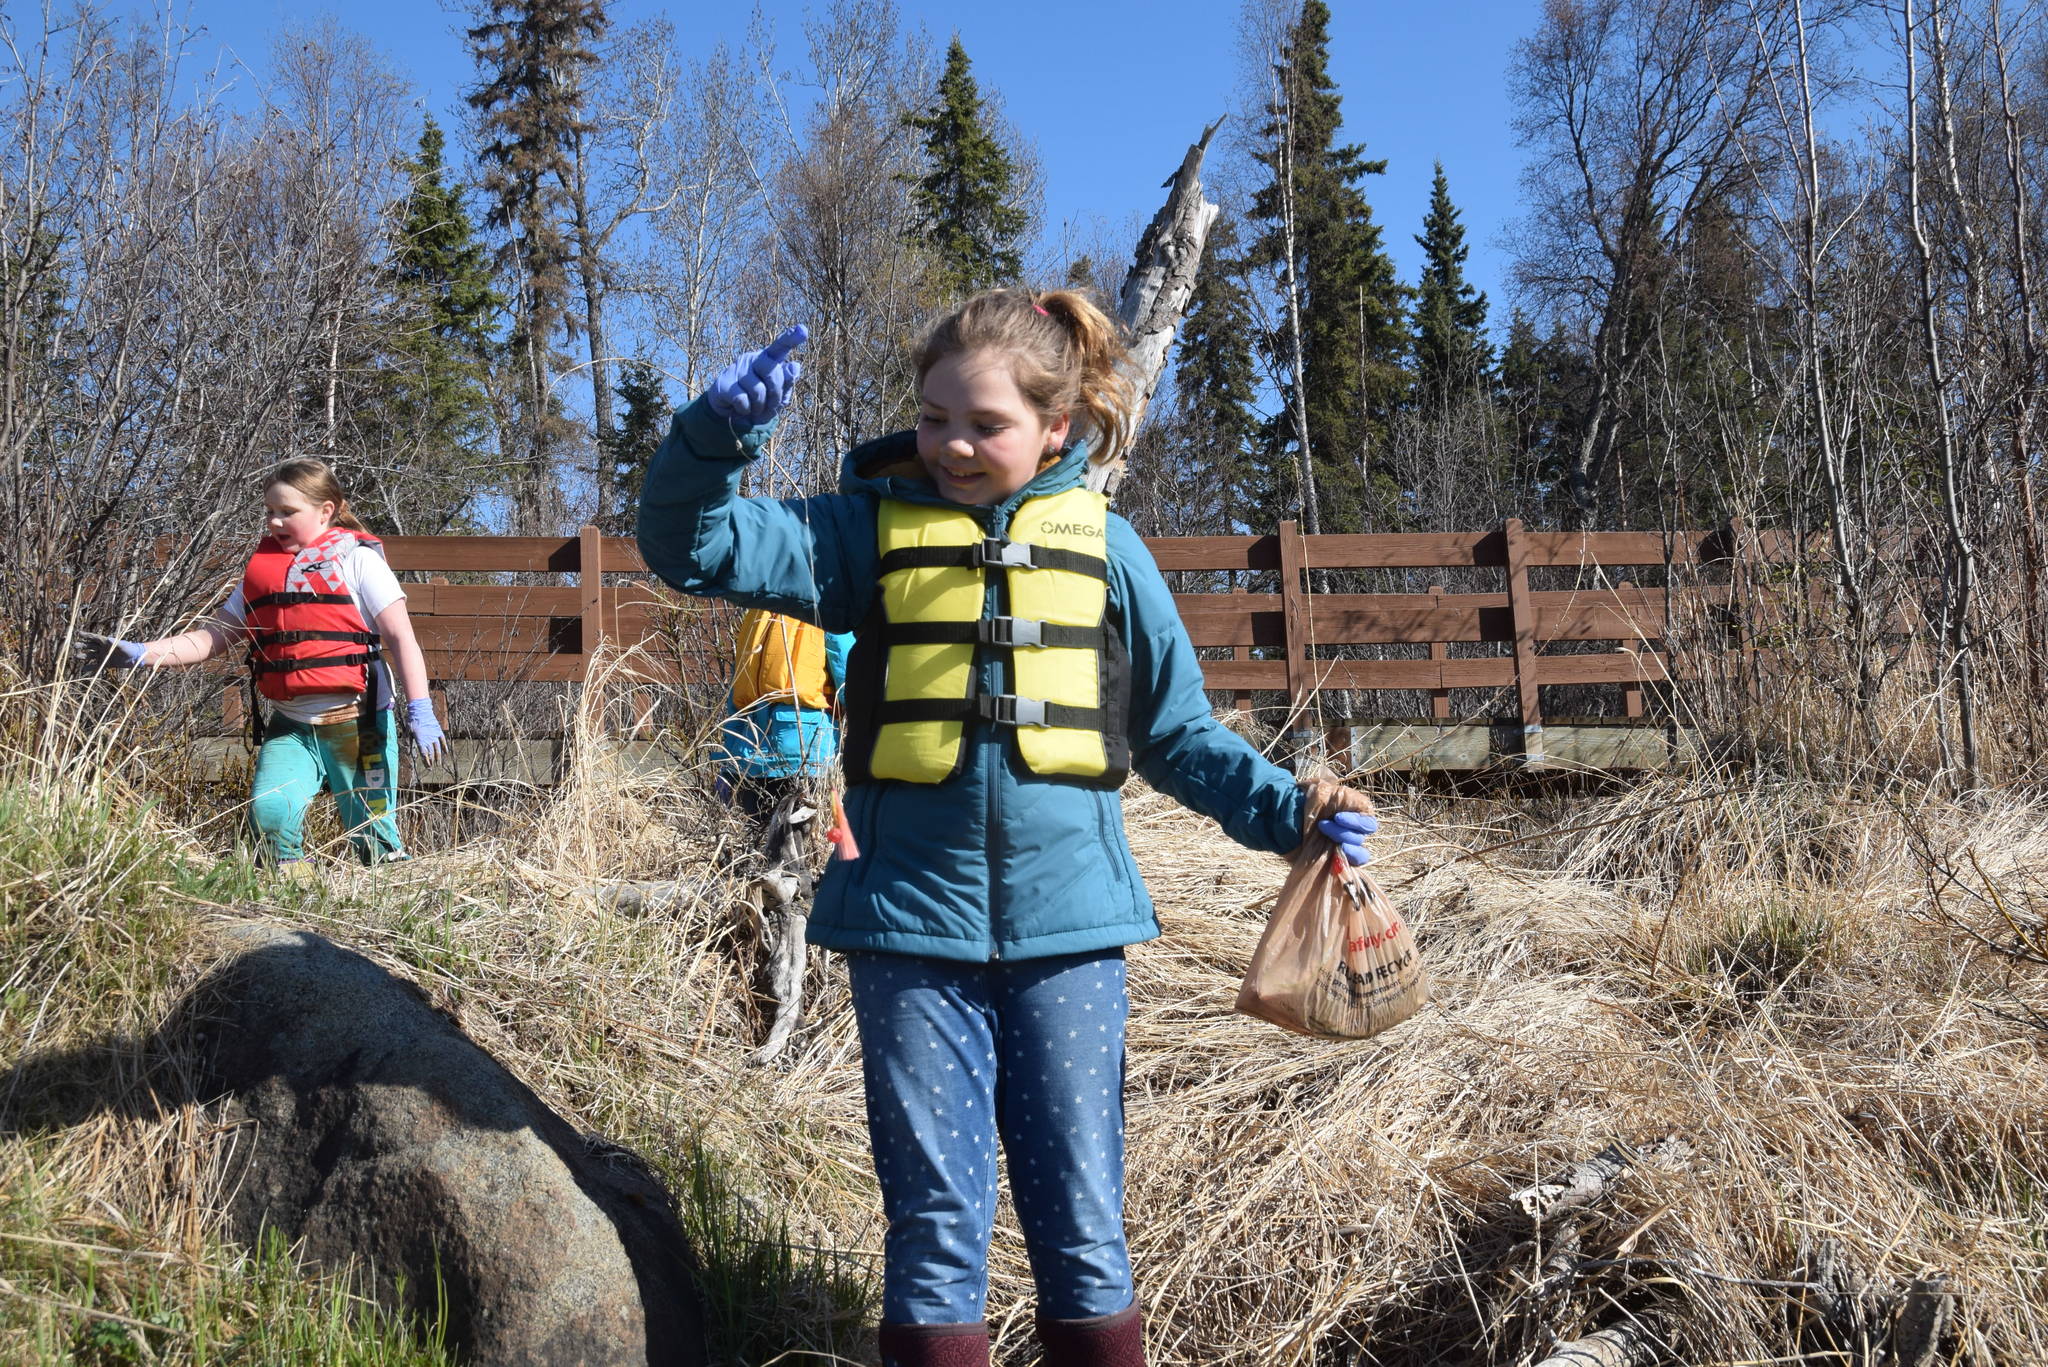 A student from Redoubt Elementary holds up a discarded fishing line and lure during the 6th Annual Kids Kenai River Spring Cleanup at Swiftwater Park in Soldotna, Alaska on May 3, 2019. (Photo by Brian Mazurek/Peninsula Clarion)